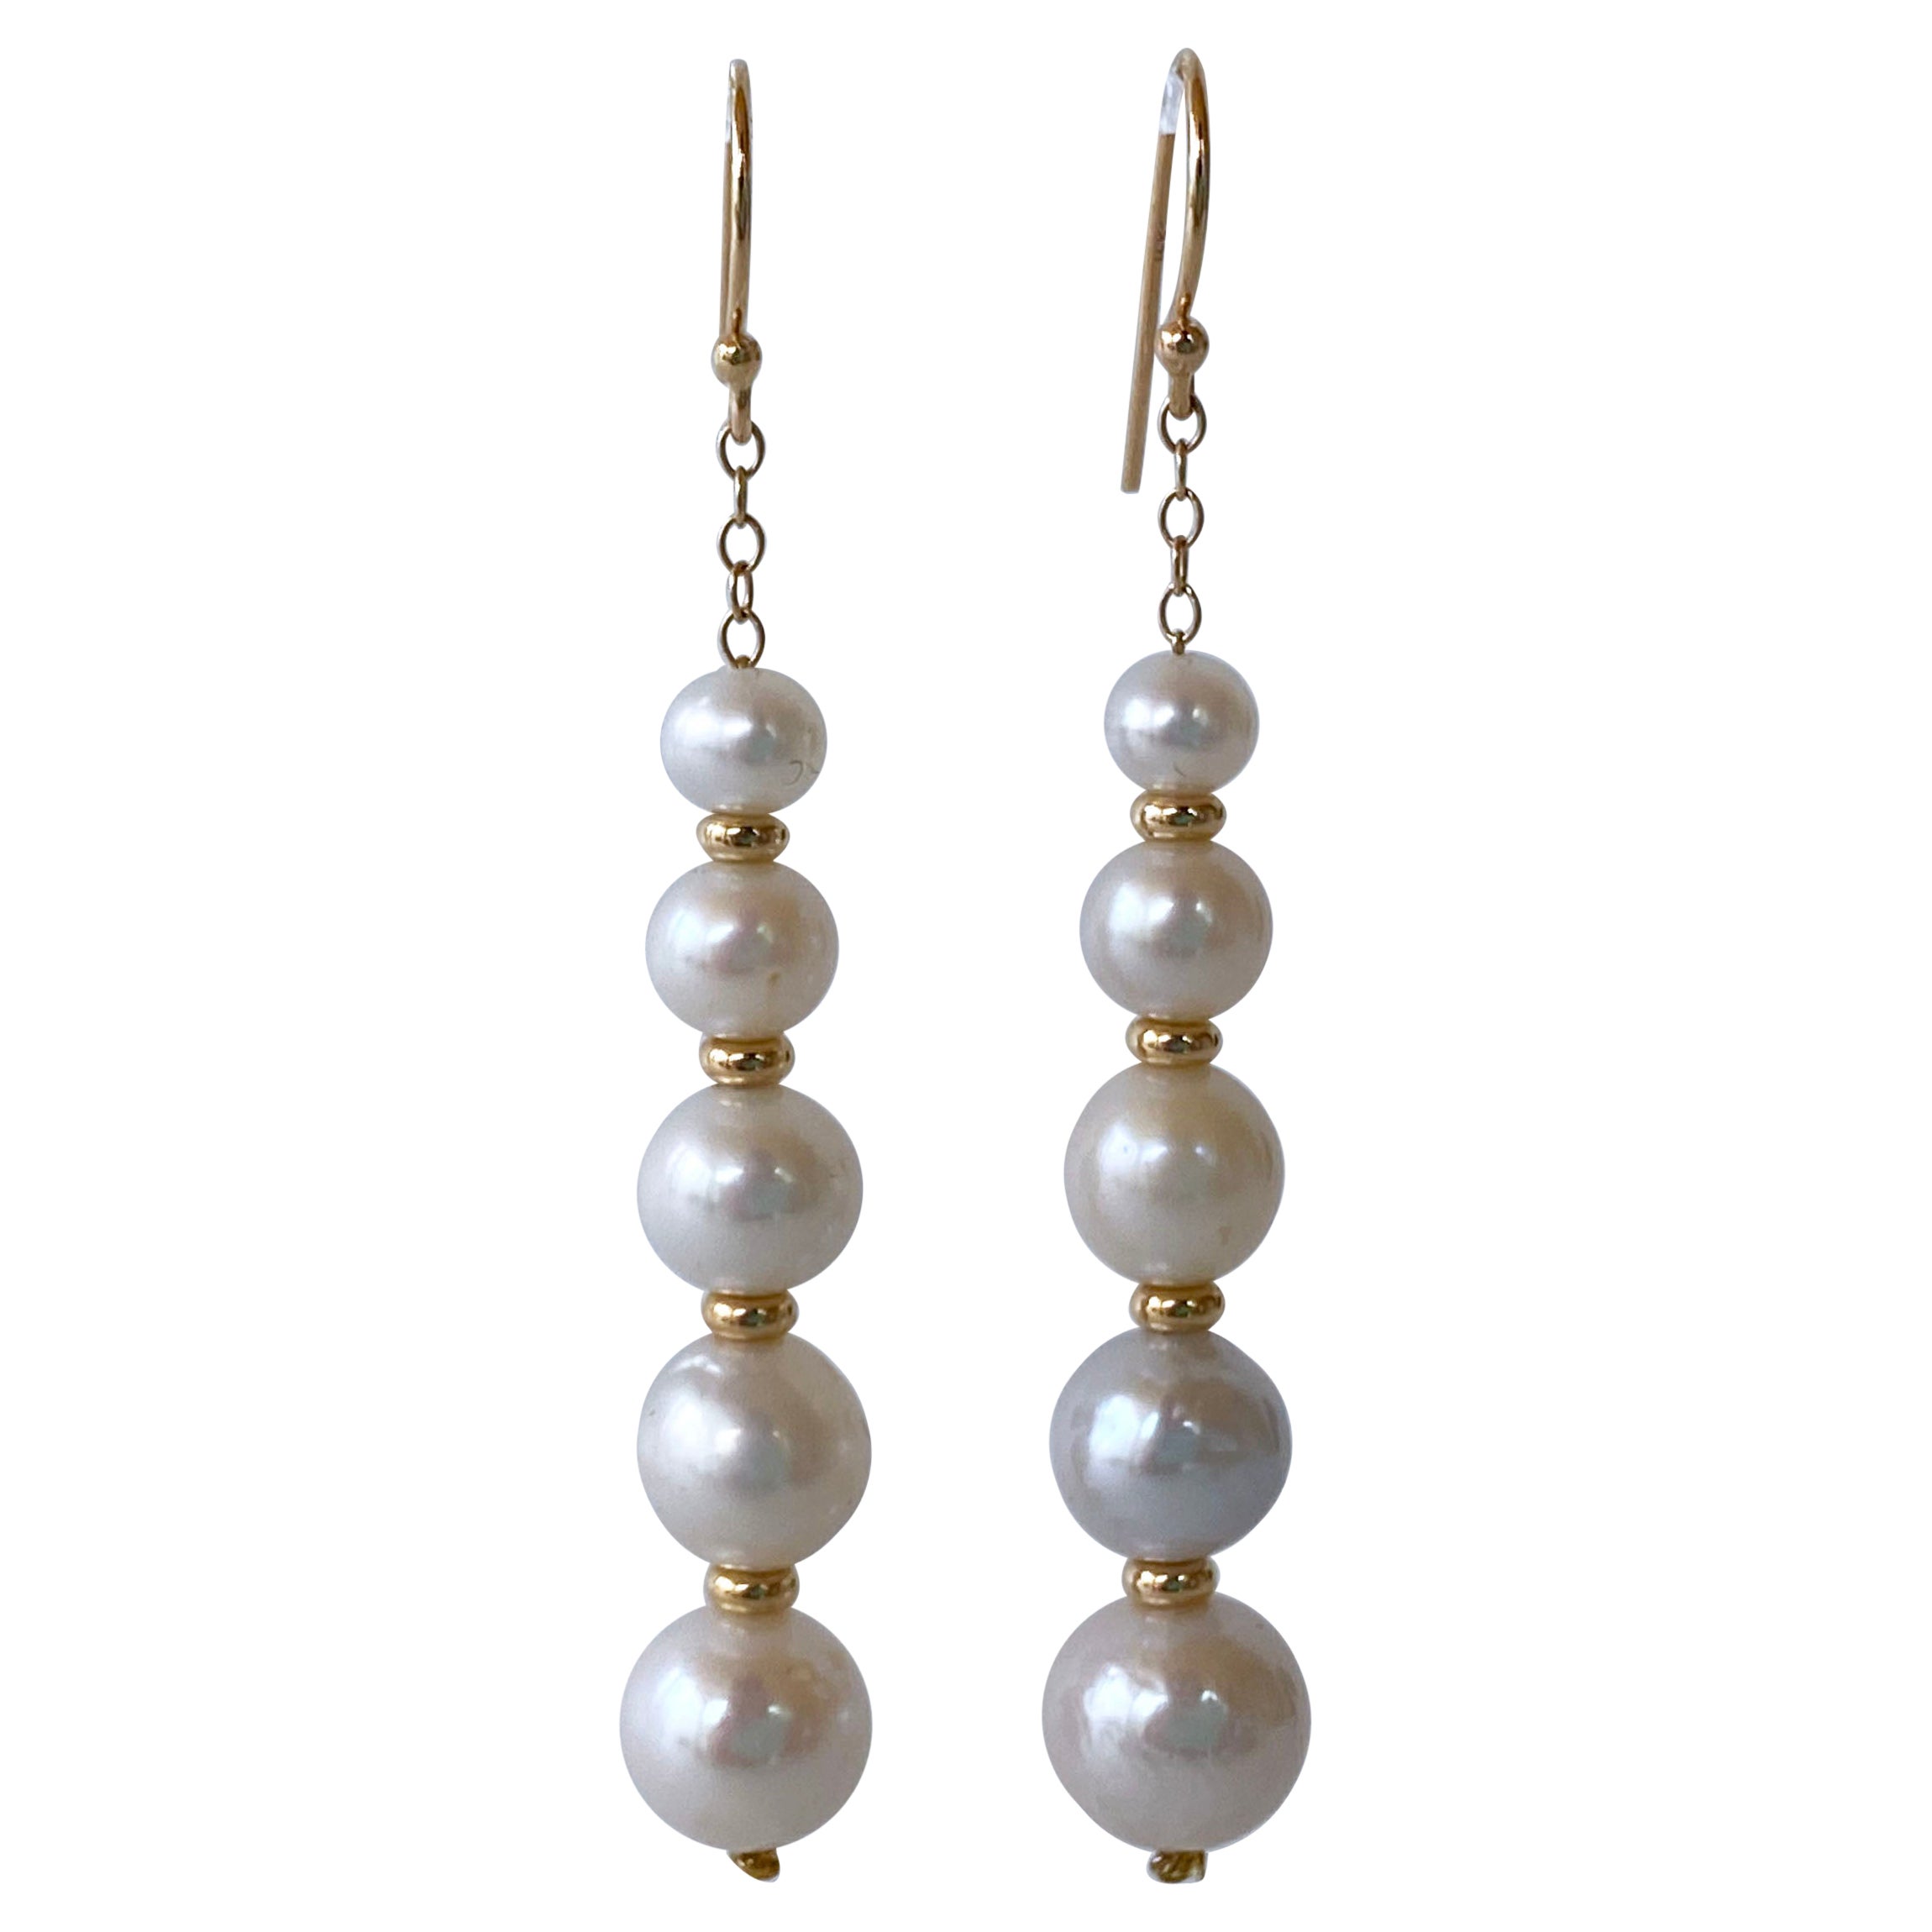 Marina J. Graduated Pearl Dangle Earrings with Solid 14k Yellow Gold Hooks For Sale